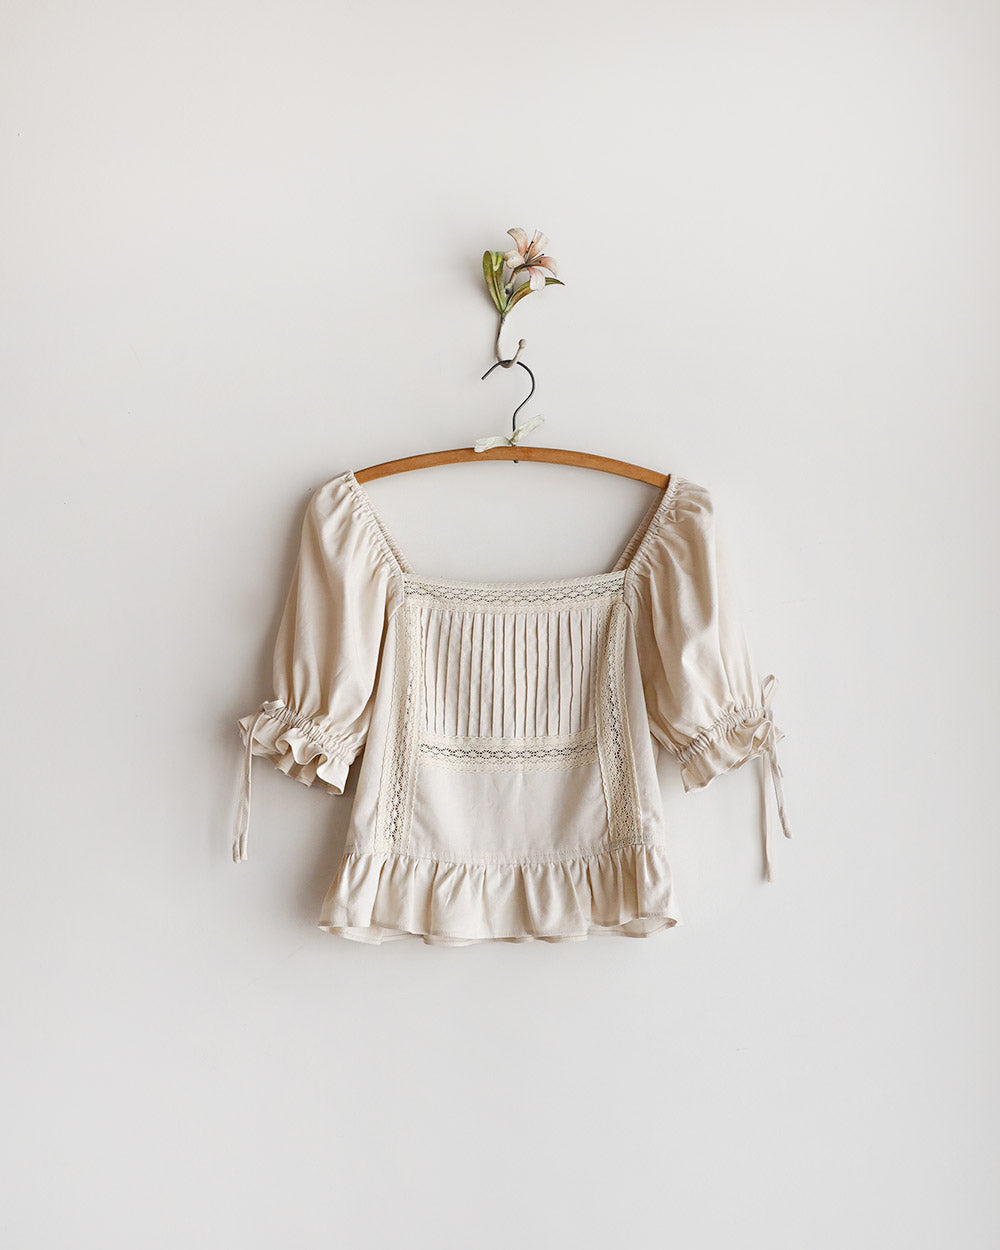 The Elanor Top by Atèlette